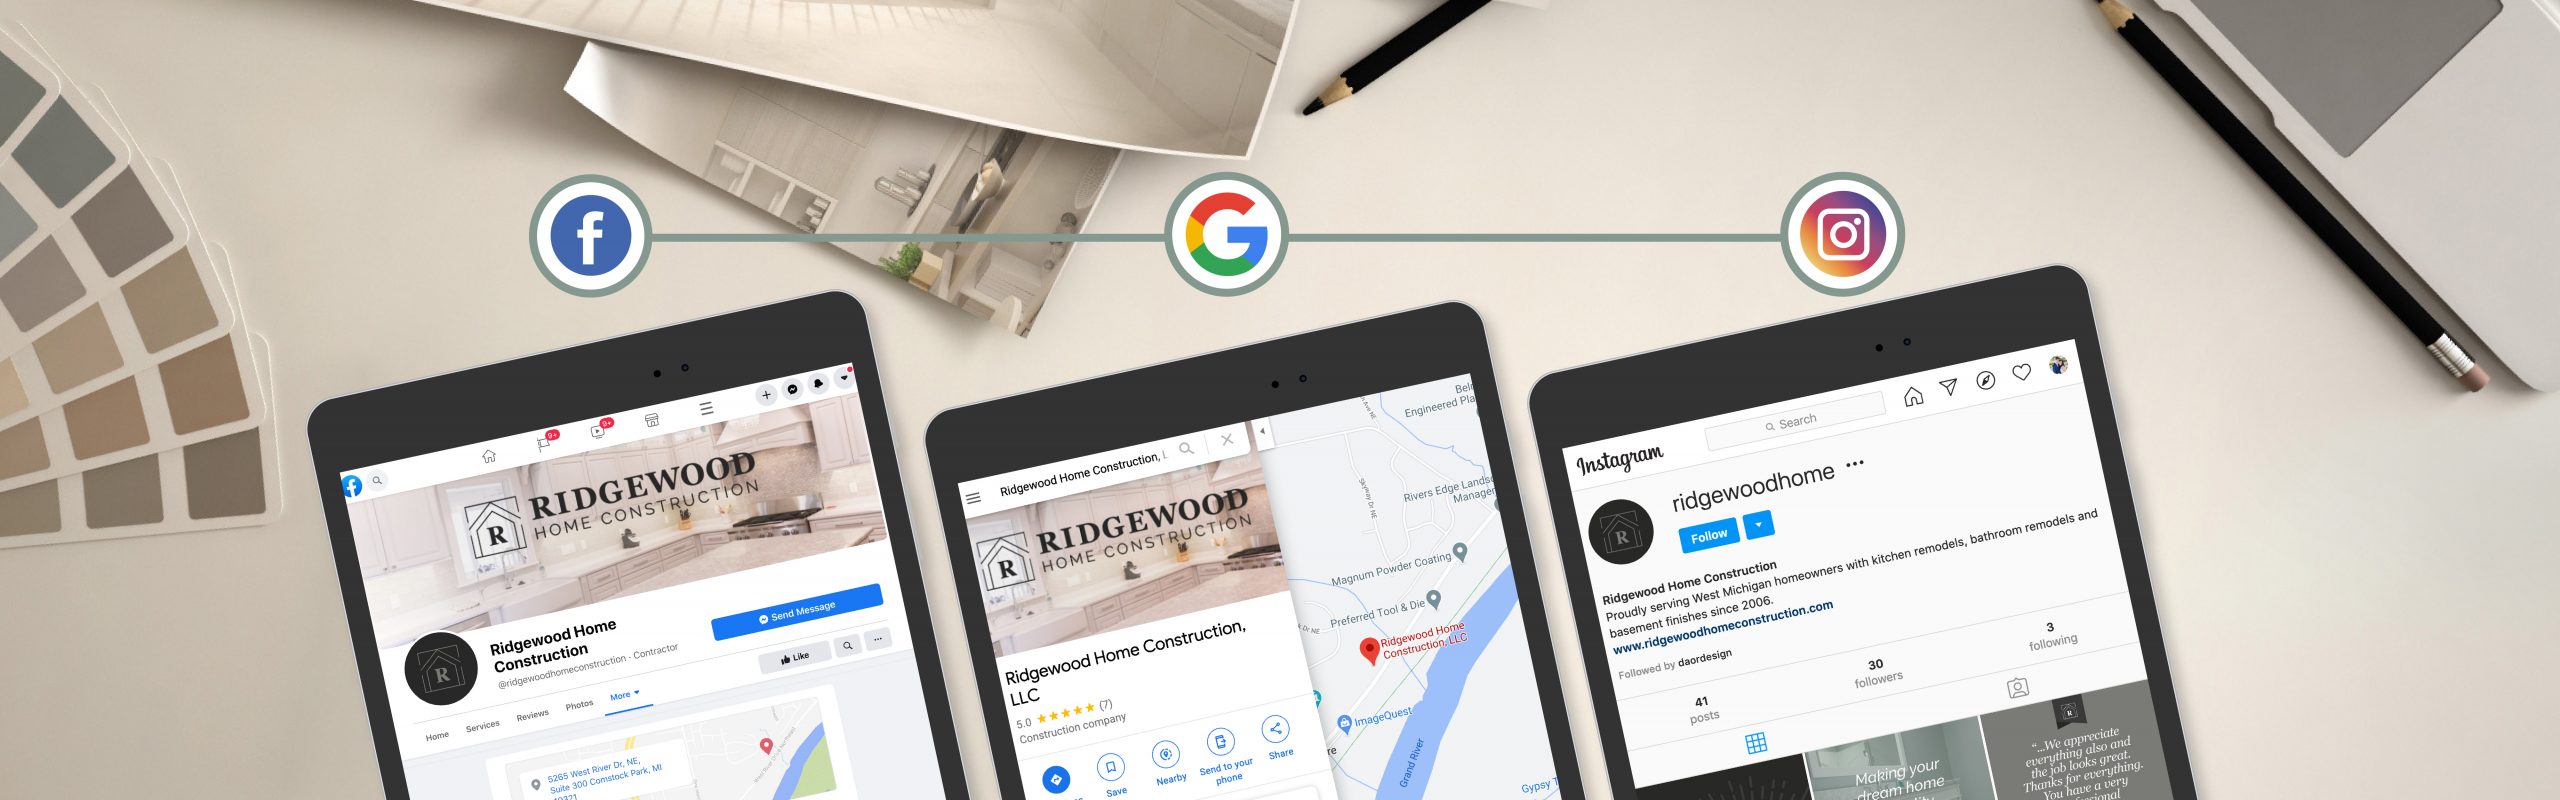 Three tablets displaying the Facebook, Google, and Instagram pages for a business named "Ridgewood Home Construction" are laid out on a white surface, surrounded by office items such as a clipboard,